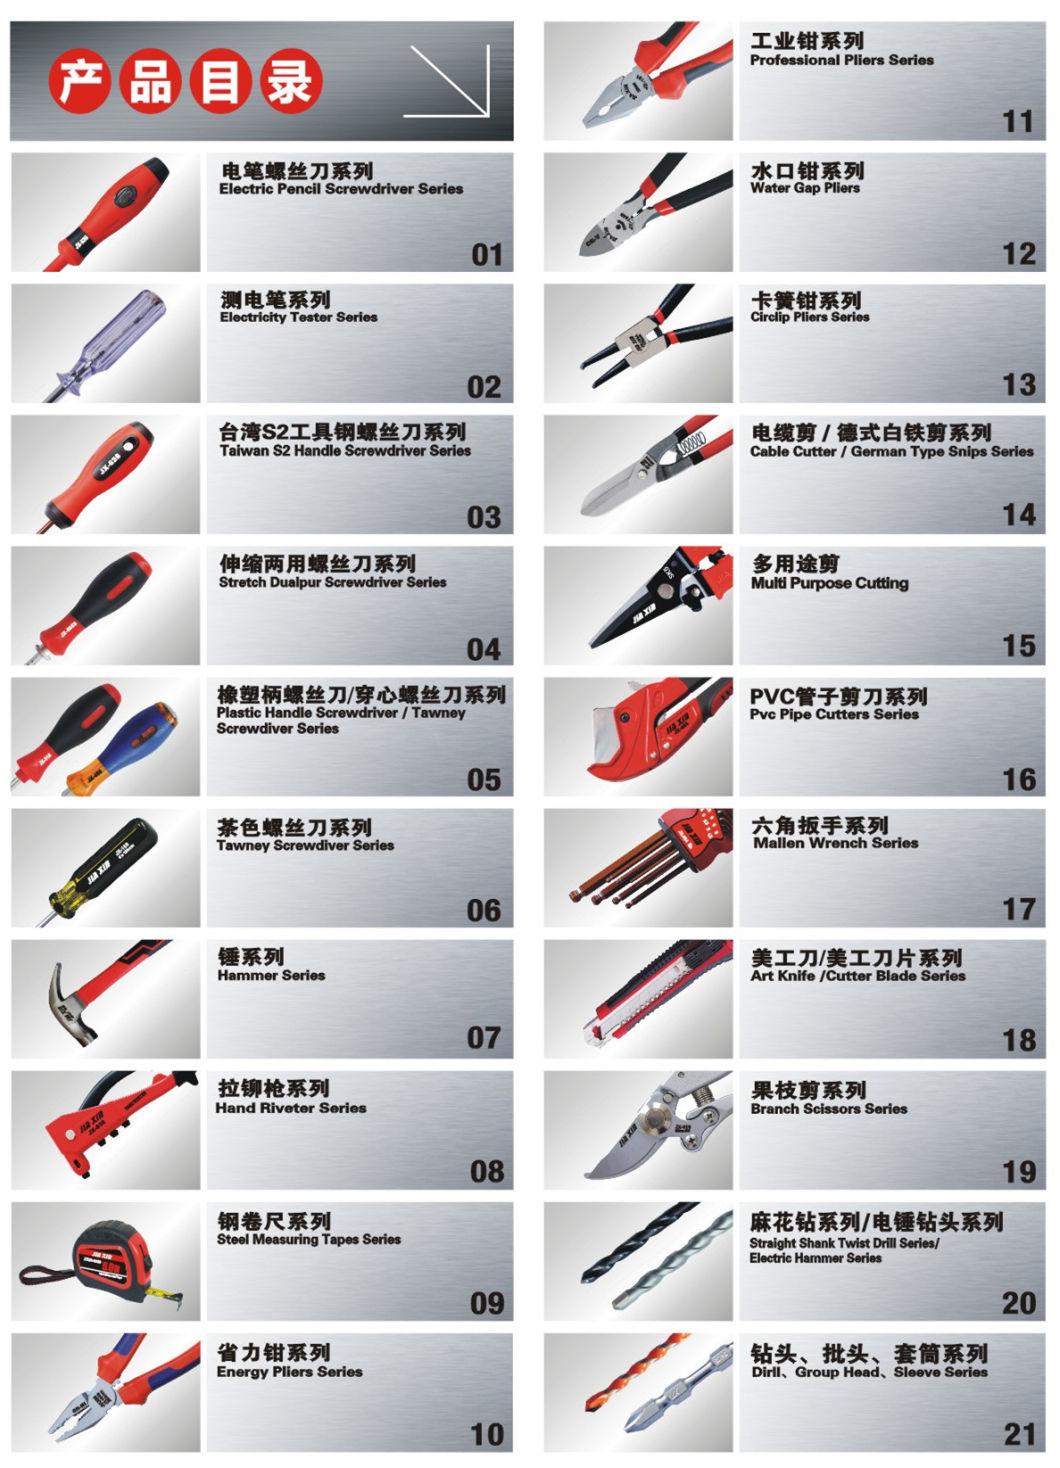 Wear Resistant S2 Screwdriver with Magnetic High Hardness and Torque Hole